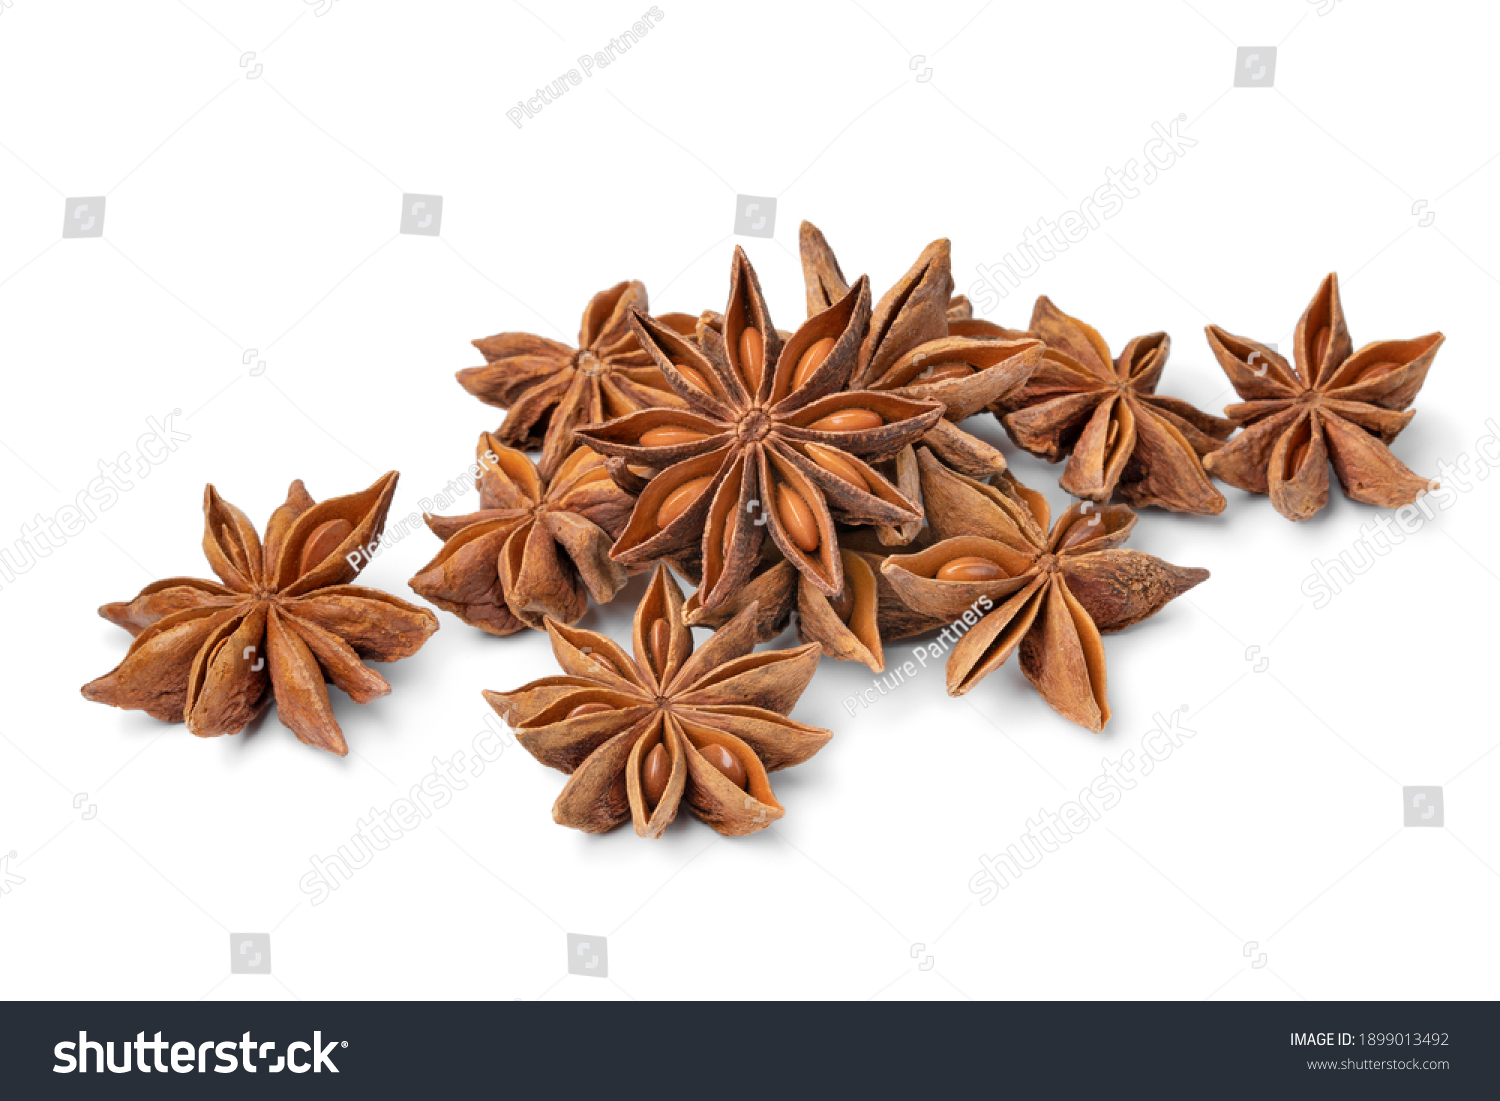 Heap of dried star anise close up isolated on white background  #1899013492